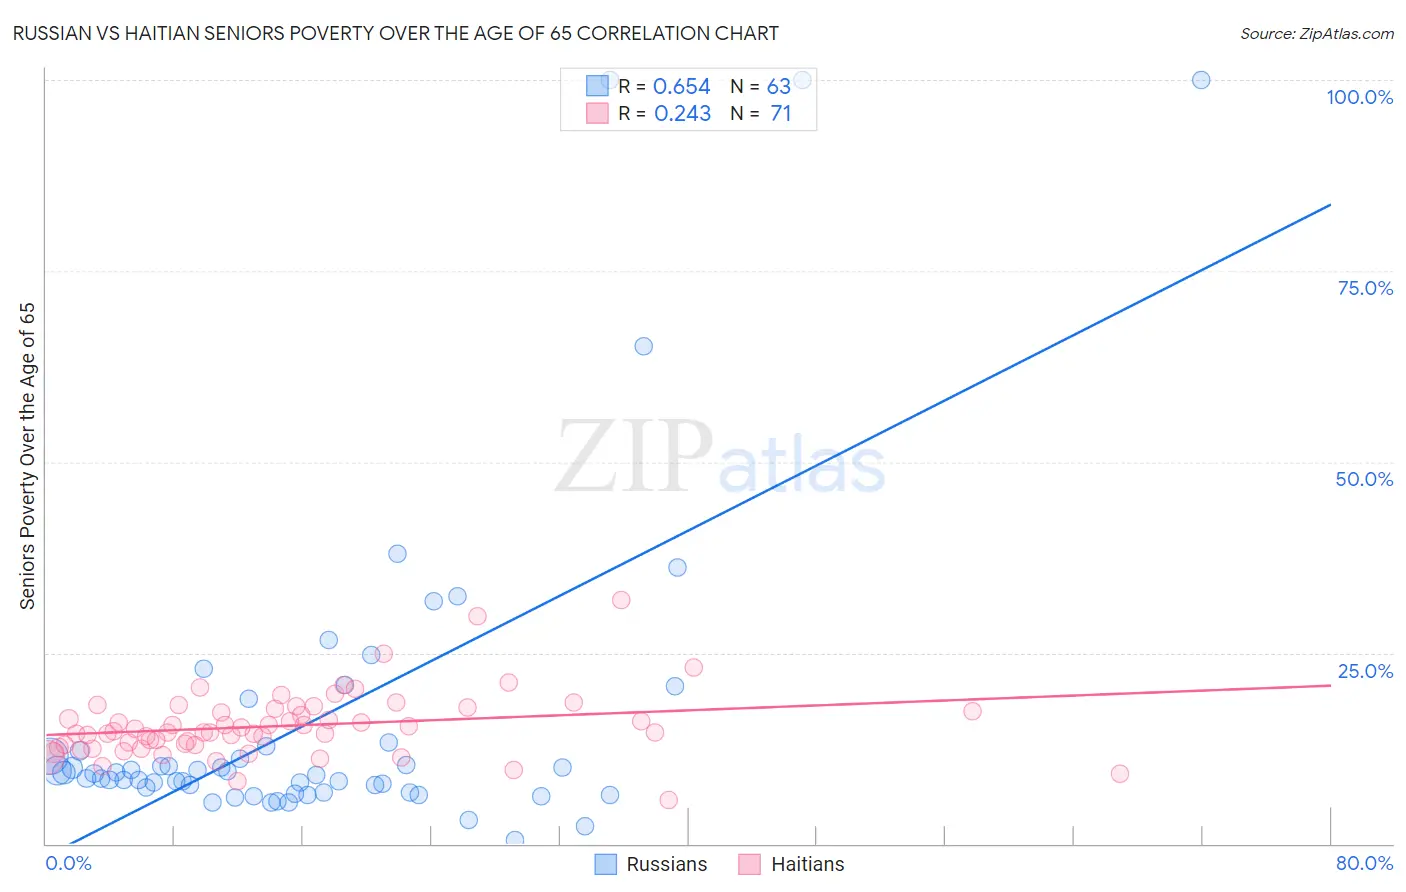 Russian vs Haitian Seniors Poverty Over the Age of 65